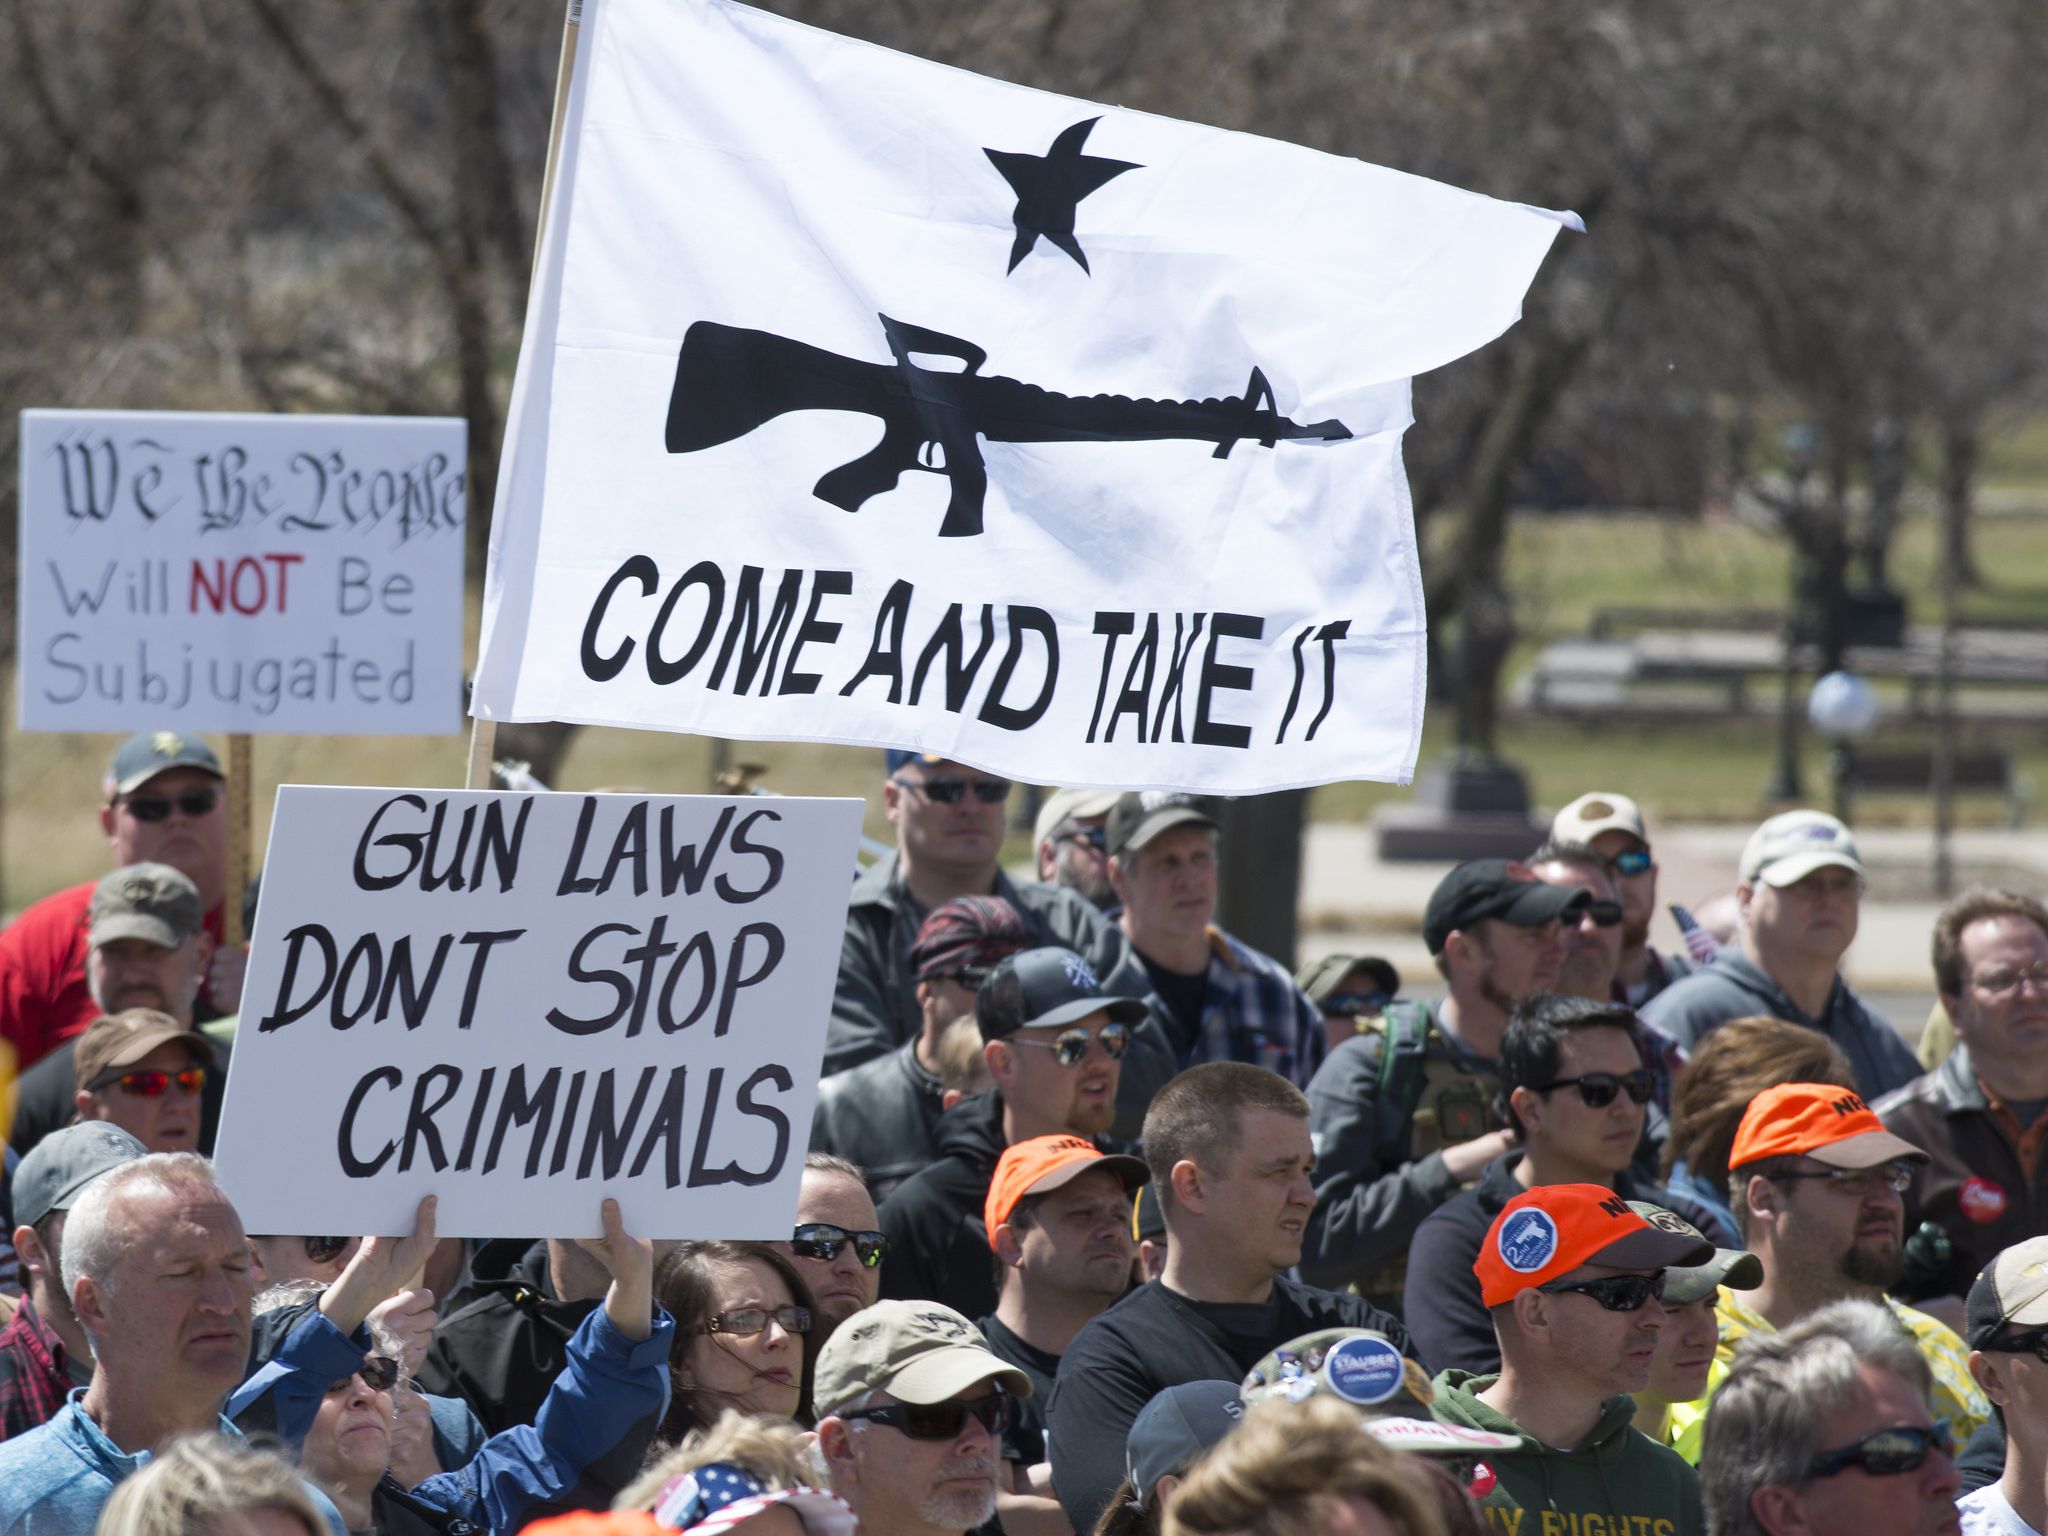 Gun owners gathered at the Minnesota Capitol in April 2018 to oppose background checks on gun purchases.